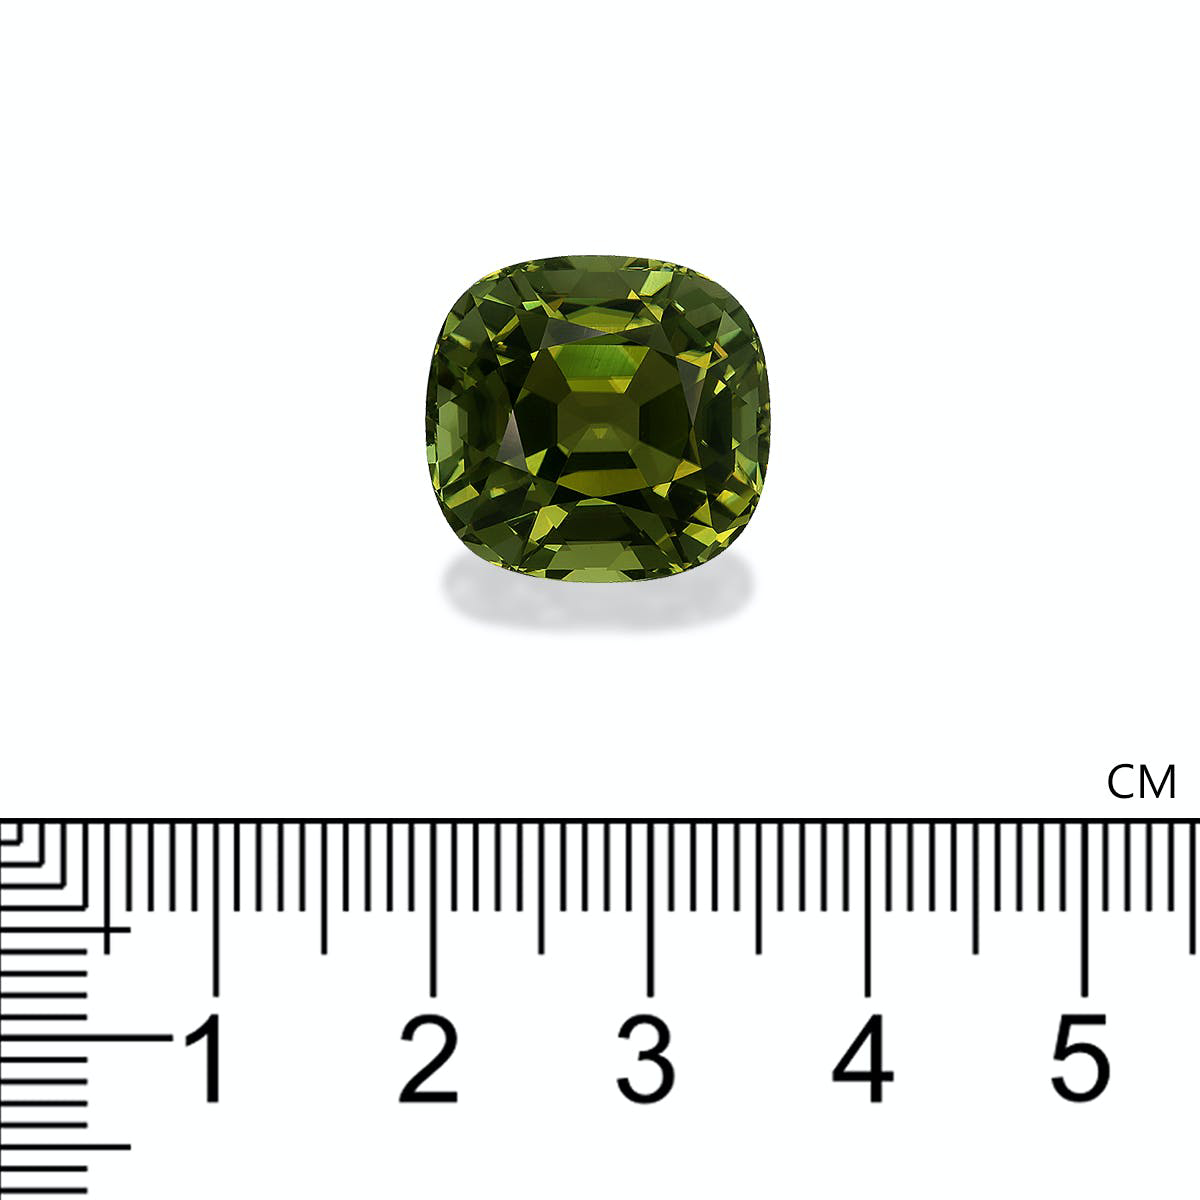 Picture of Forest Green Cuprian Tourmaline 19.20ct (MZ0225)